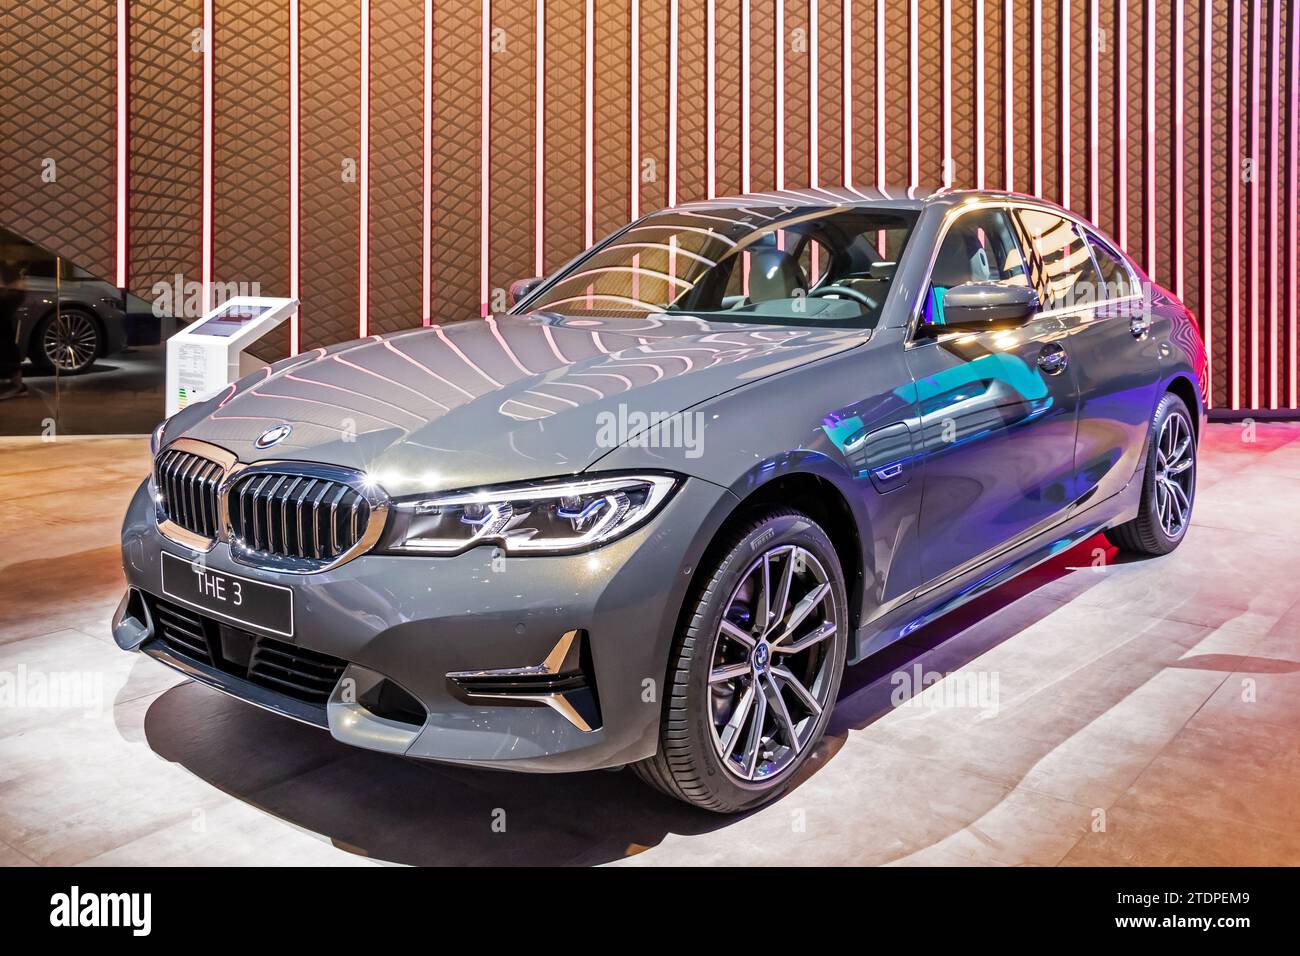 BMW 3 series car showcased at the IAA Mobility 2021 motor show in Munich, Germany - September 6, 2021. Stock Photo